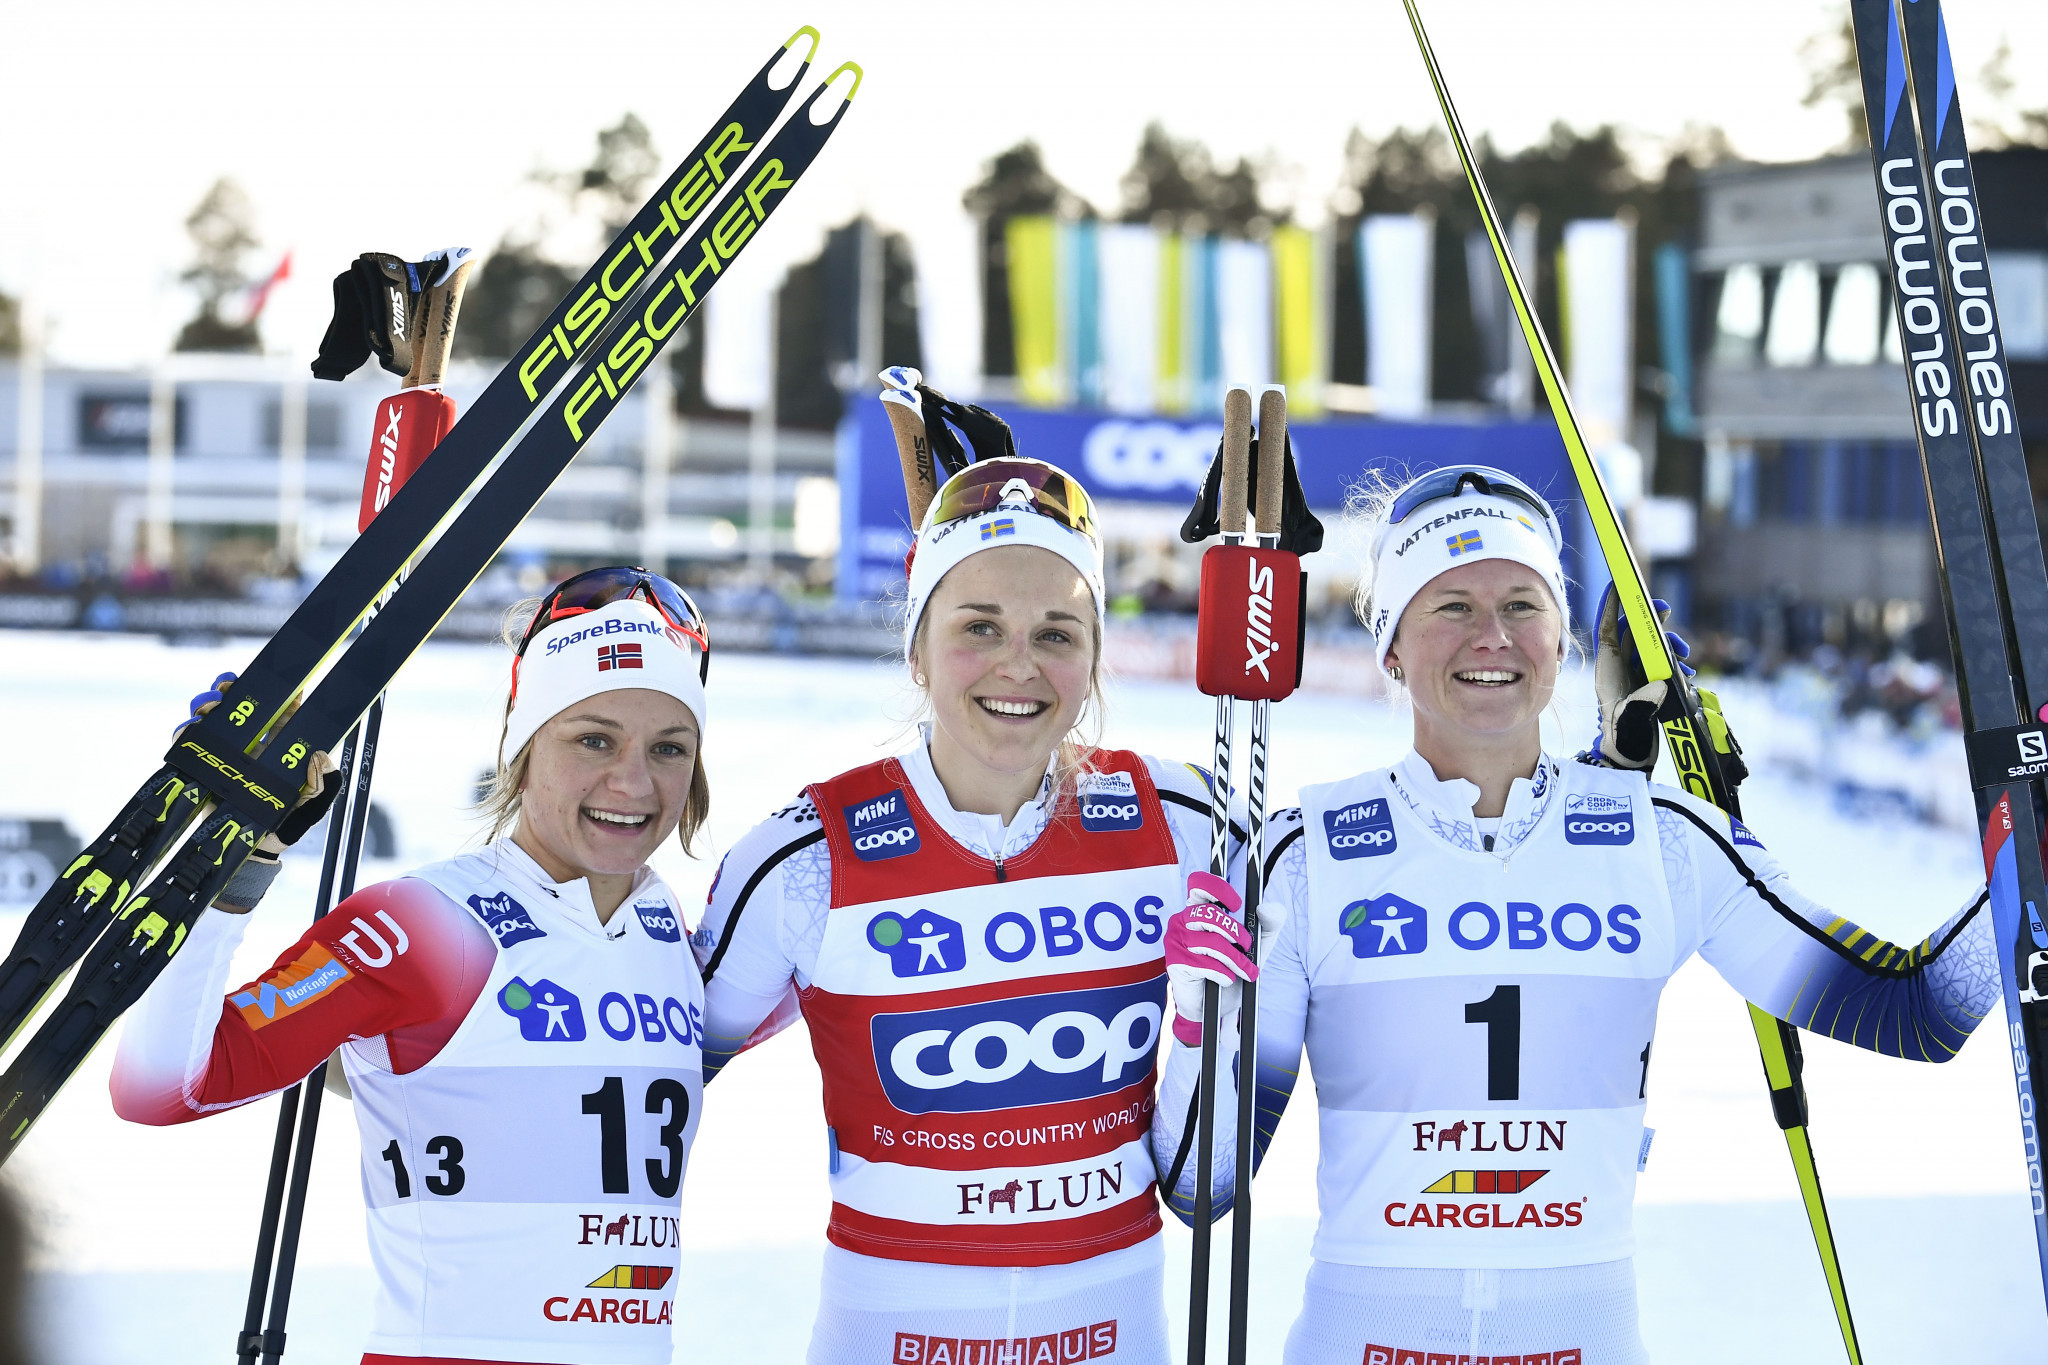 Olympic champion Nilsson extends lead in FIS Cross-Country sprint World Cup standings